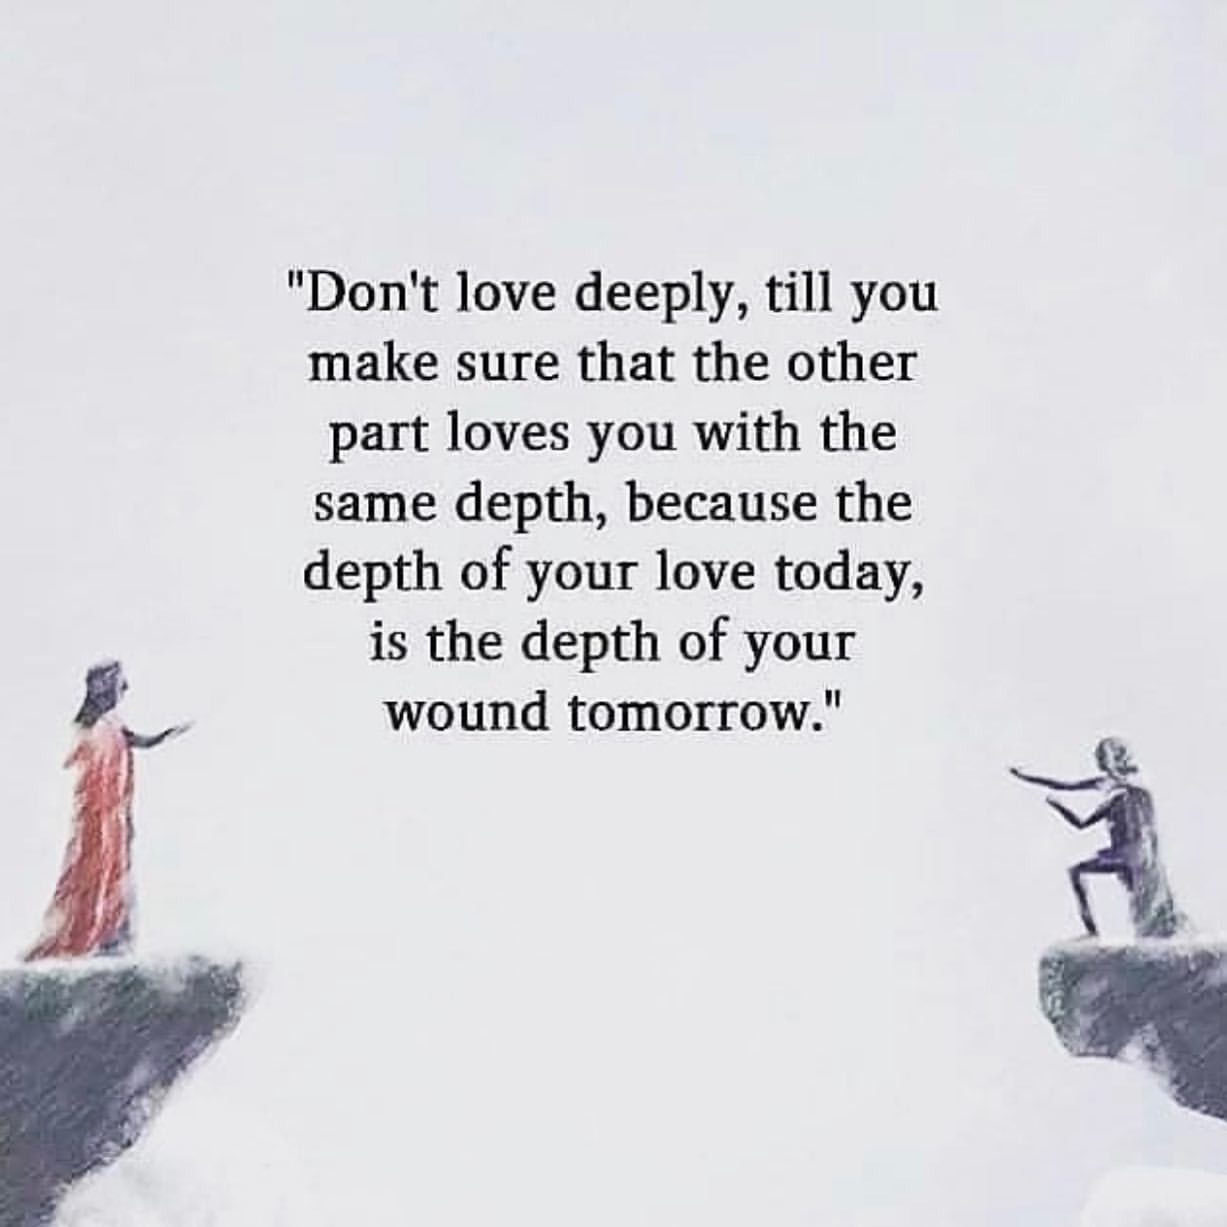 "Don't love deeply, till you make sure that the other part loves you with the same depth, because the depth of your love today, is the depth of your wound tomorrow."